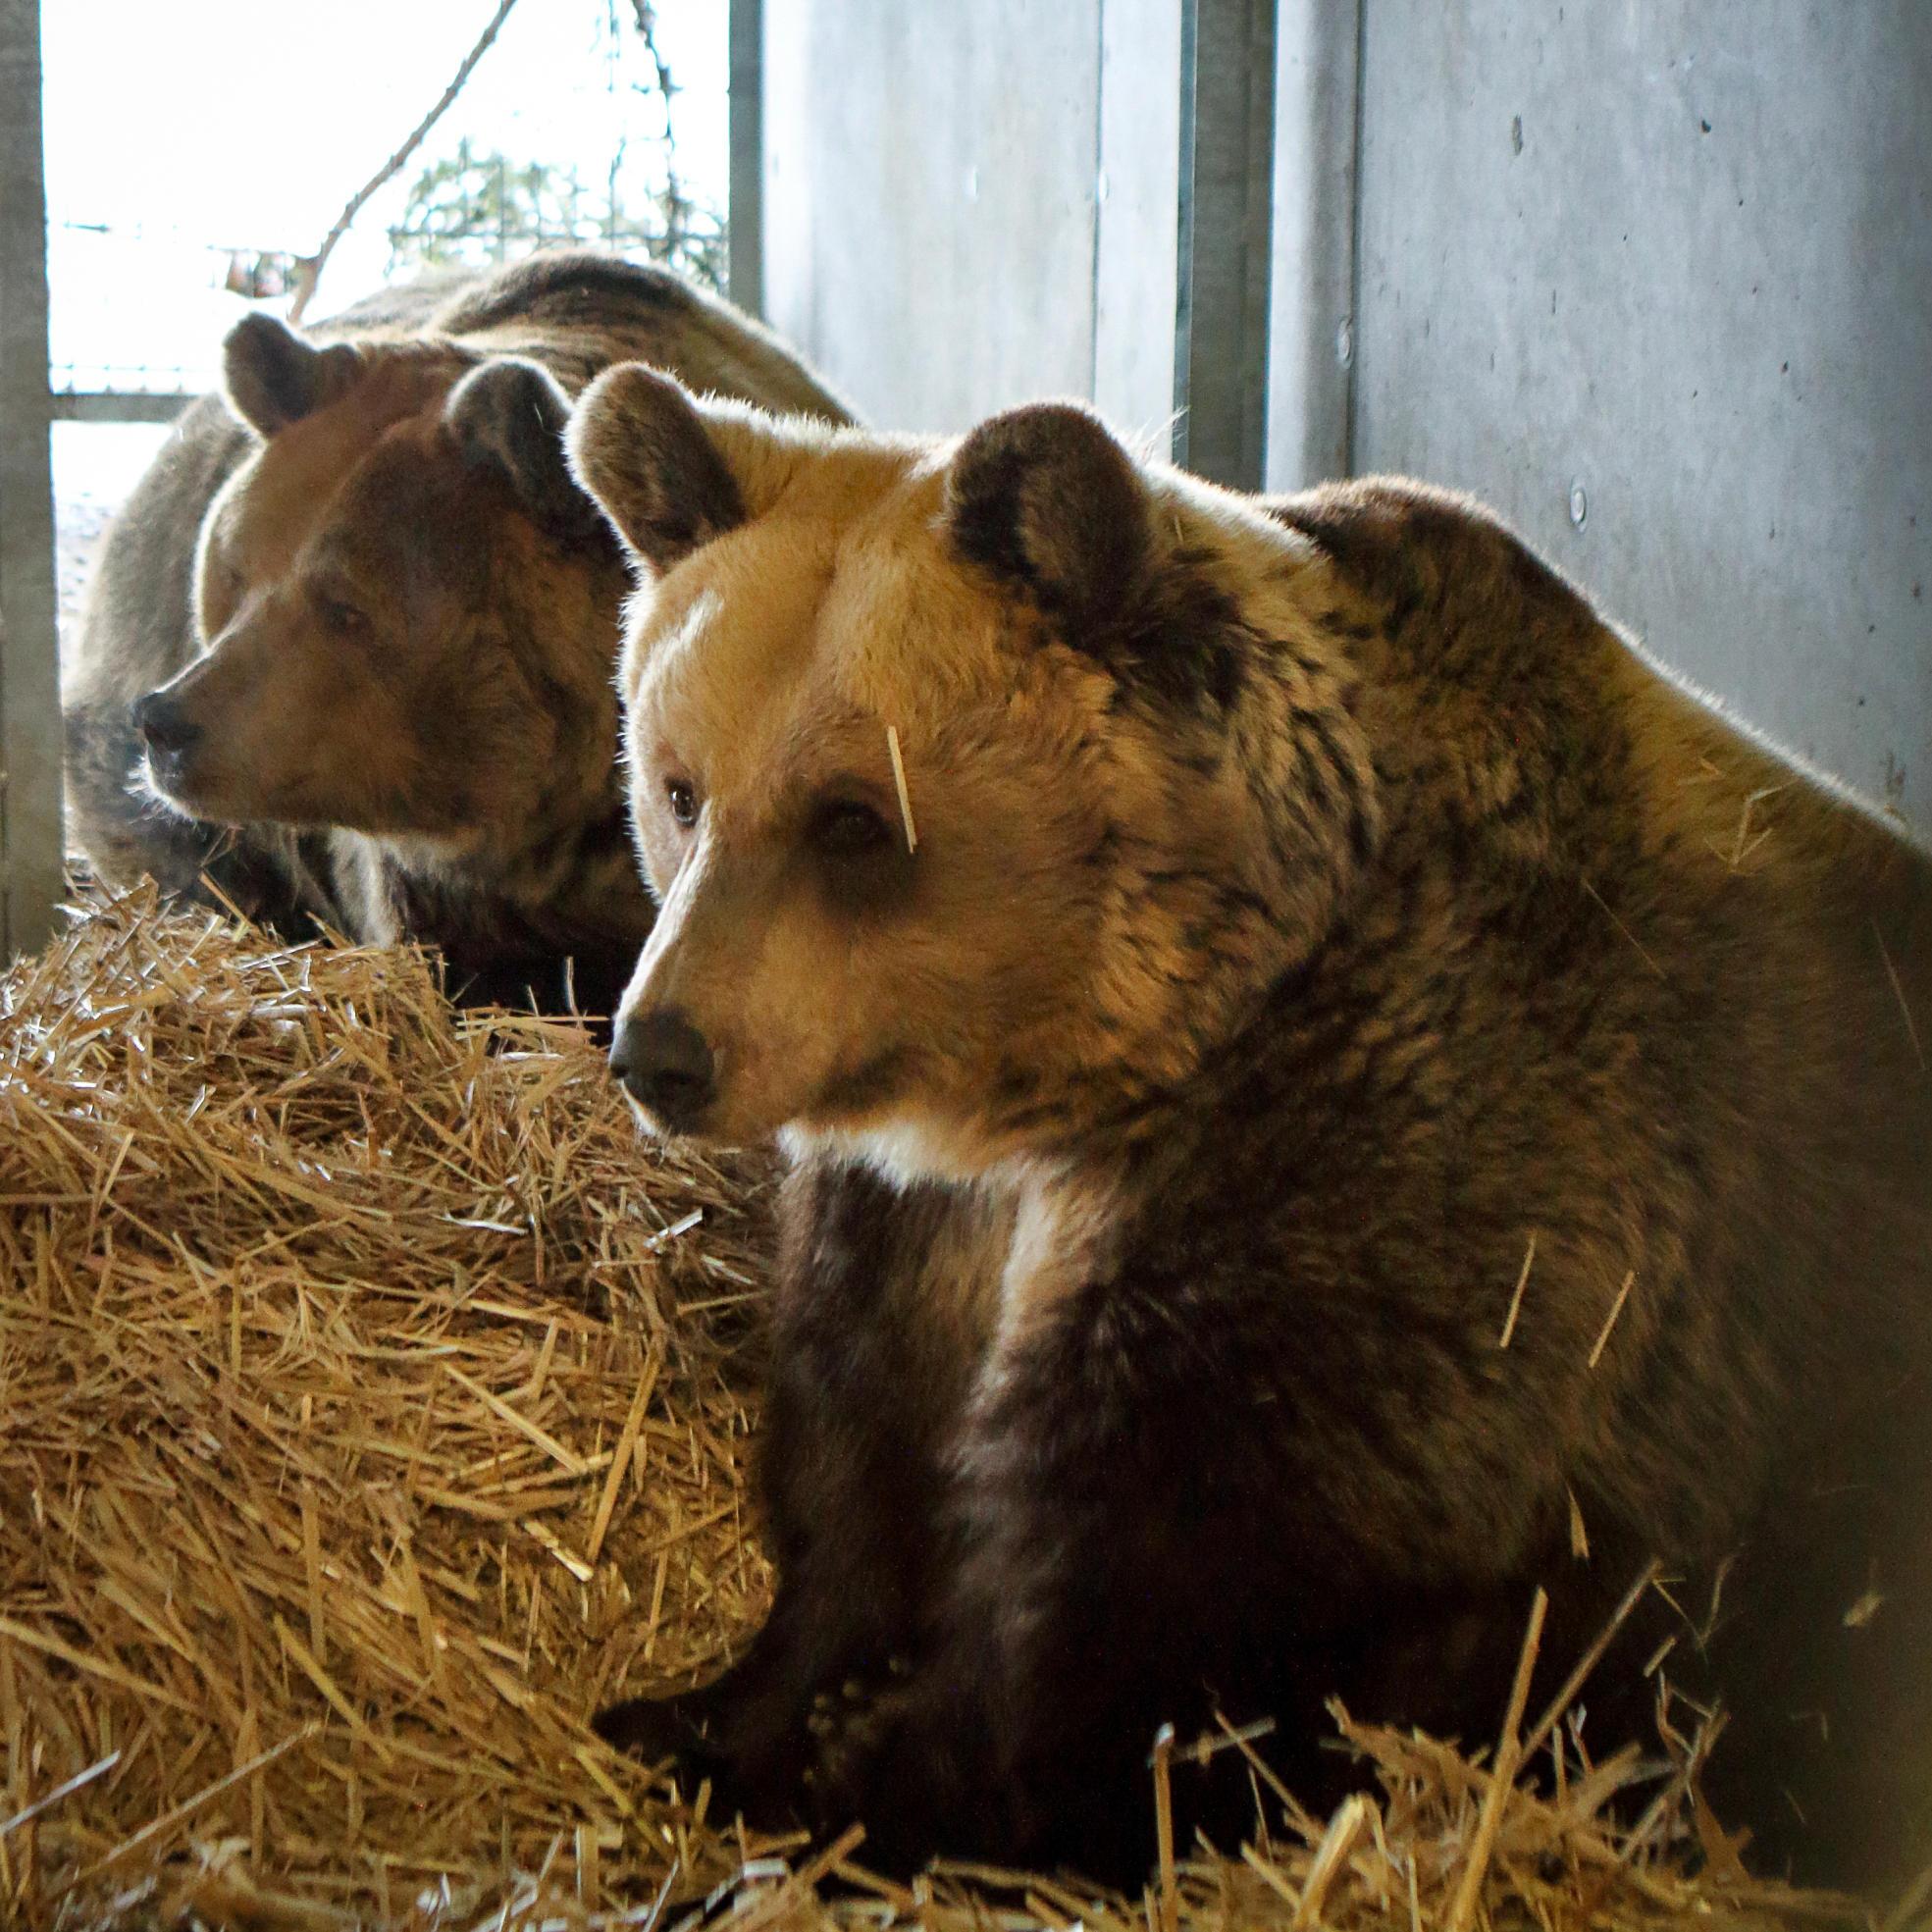 two bears in enclosure